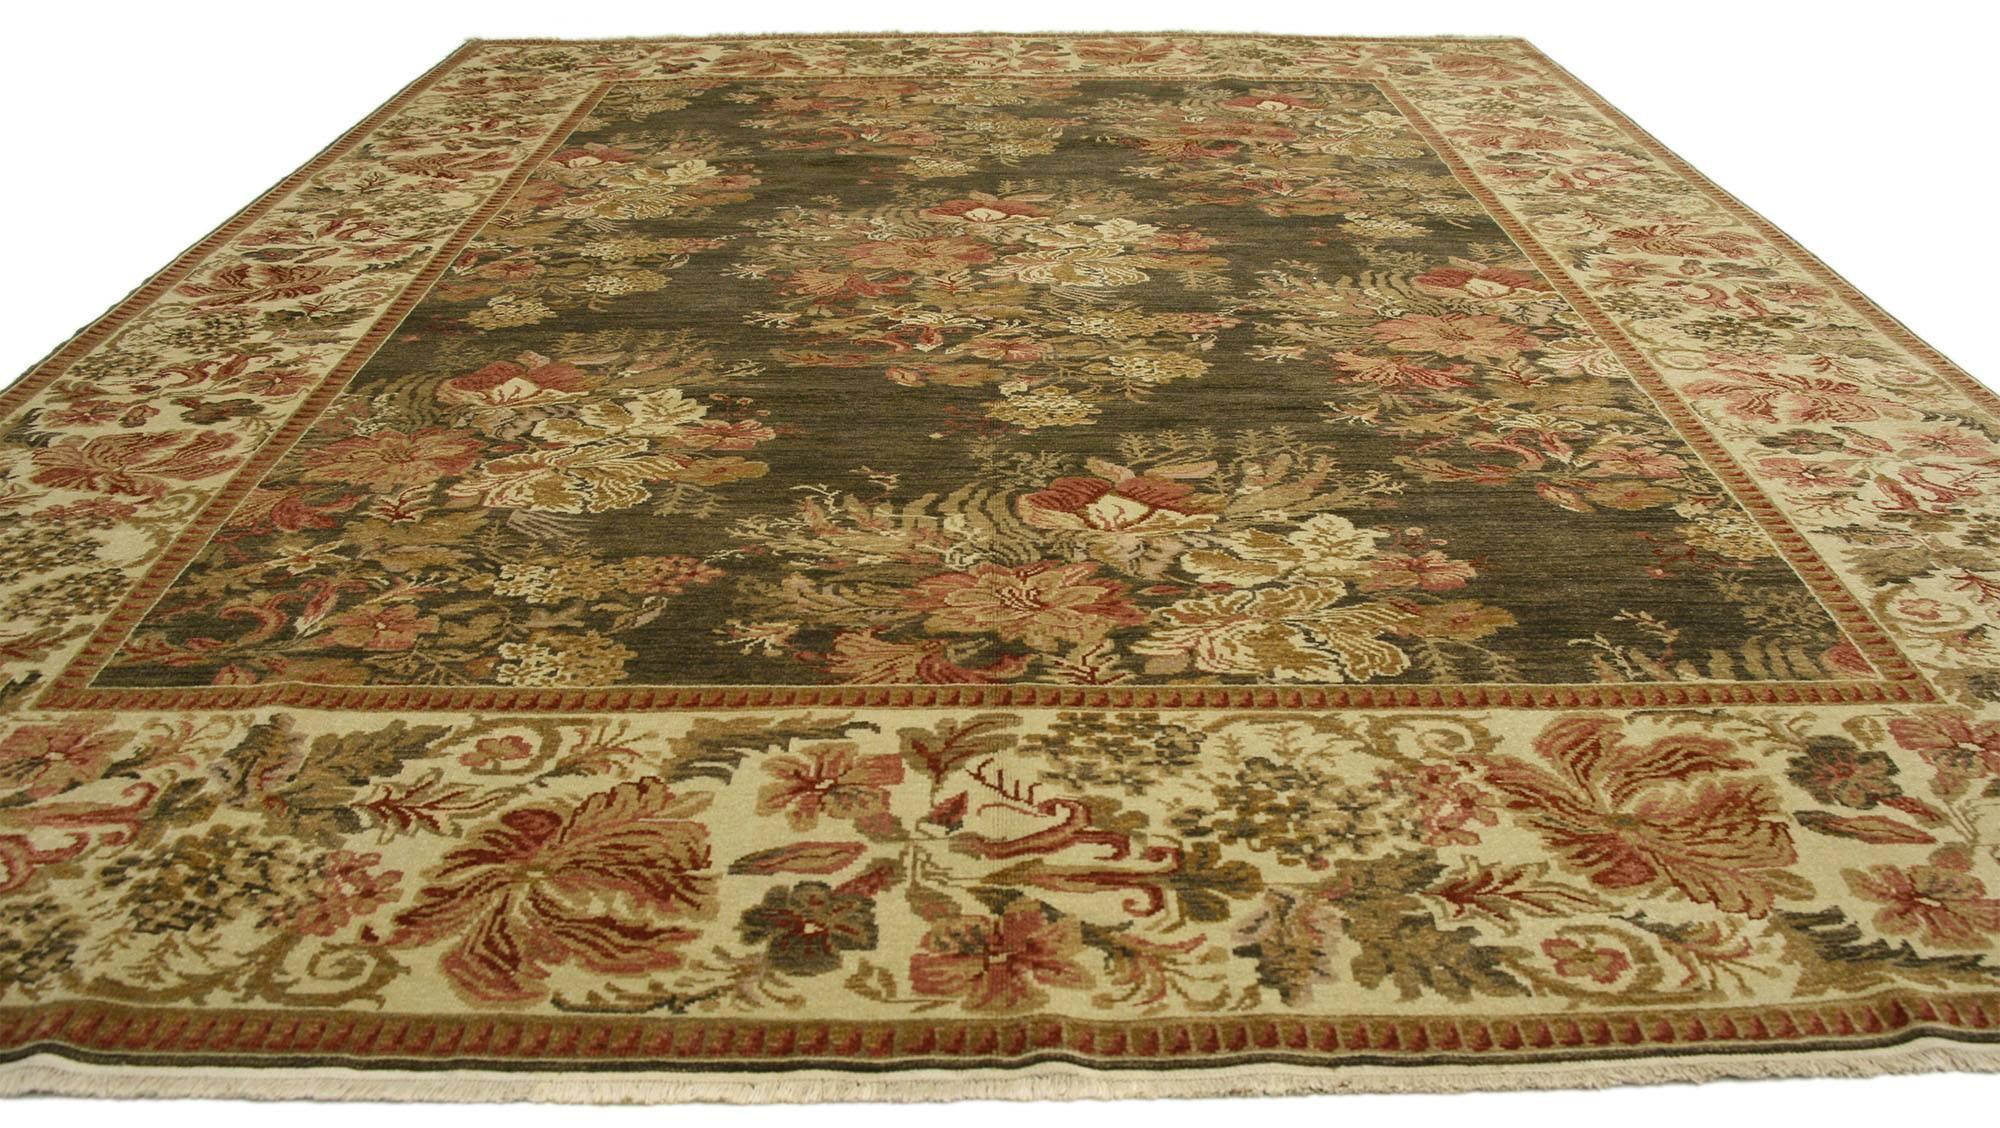 77118 Vintage Turkish Bessarabian Rug with French Victorian Chintz Style 09'01 x 11'09. Drawing inspiration from Mario Buatta and Chintz style,  this hand knotted wool vintage Turkish Bessarabian rug displays radiant warmth and floral bounty